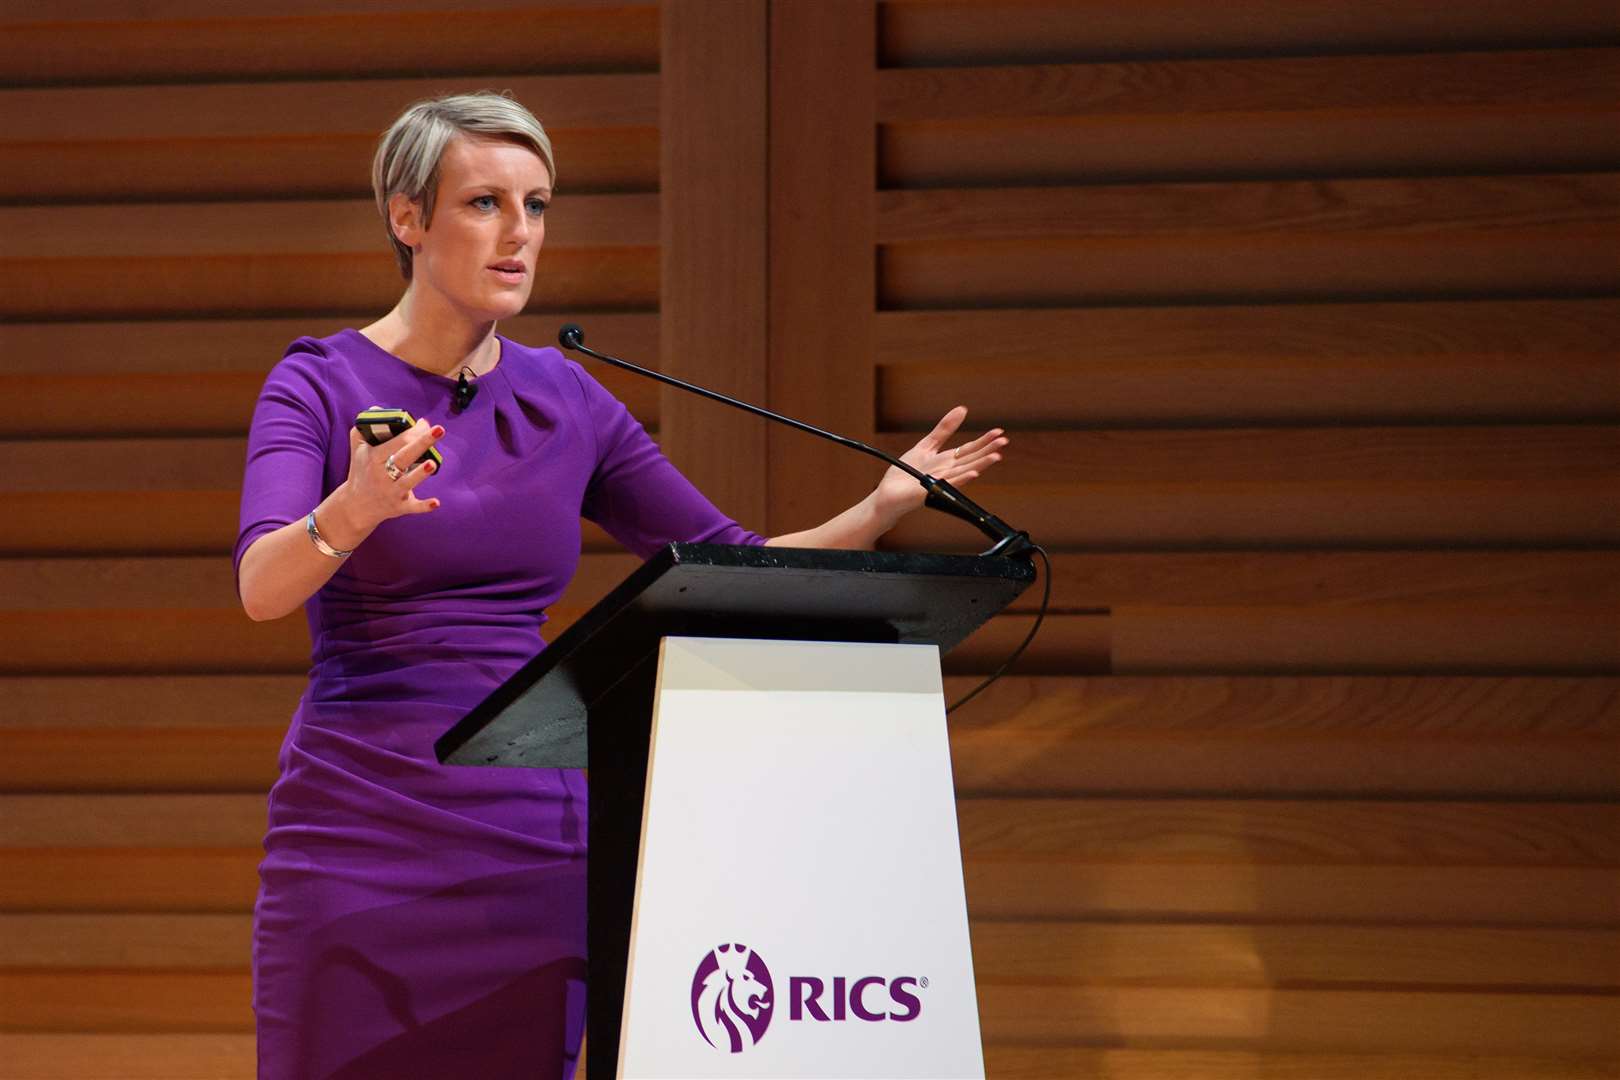 BBC broadcaster Steph McGovern will be the keynote speaker at Kent Vision Live